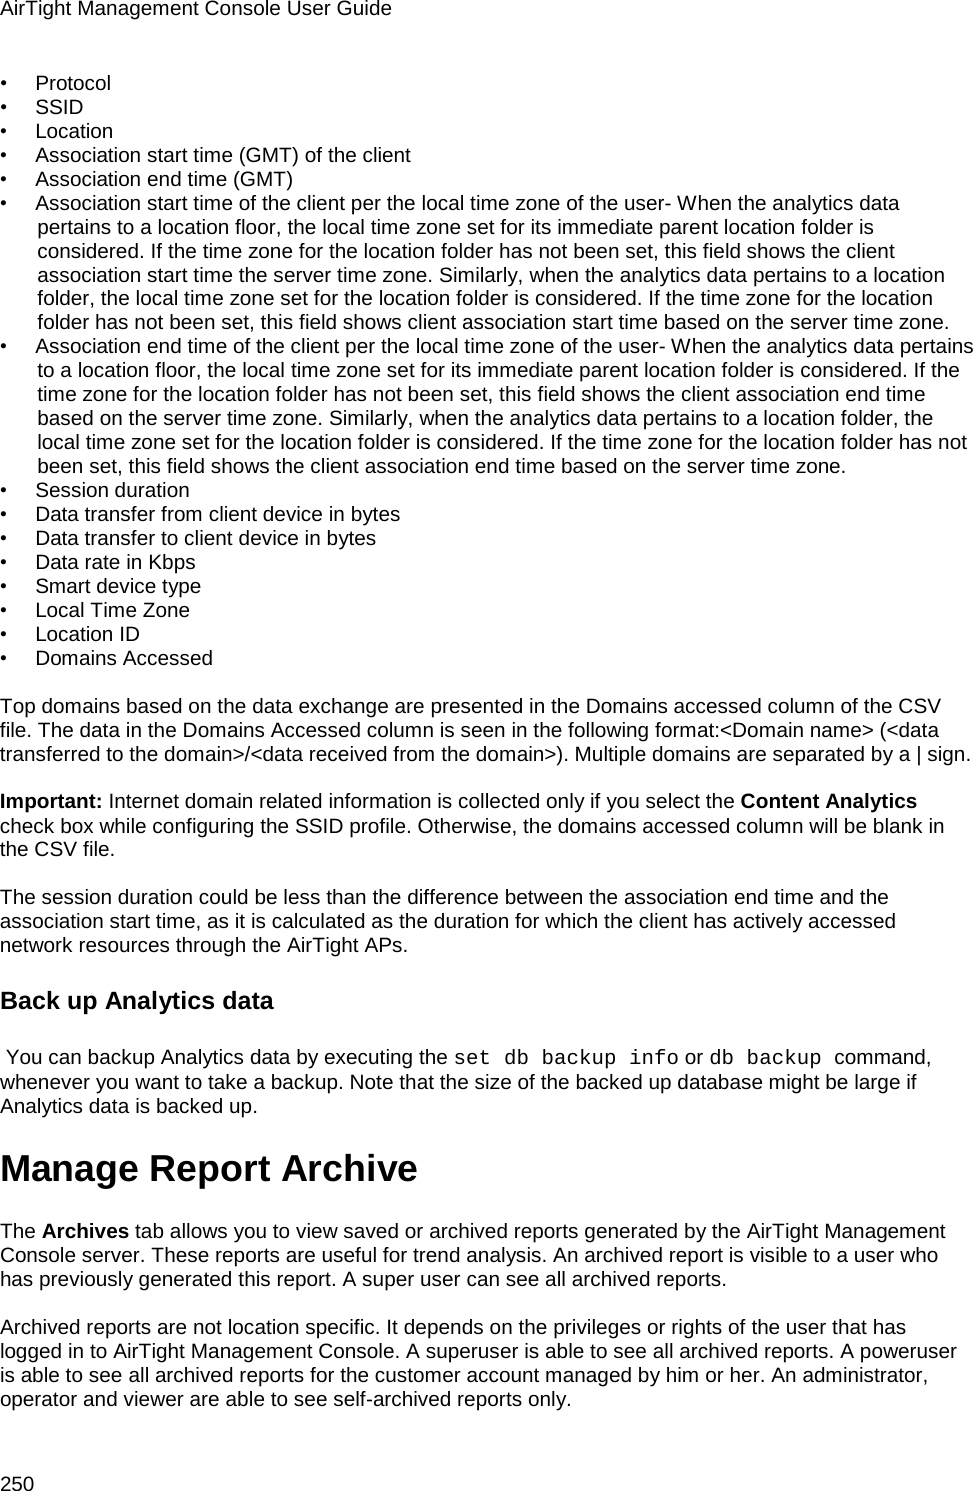 AirTight Management Console User Guide 250 •        Protocol •        SSID •        Location •        Association start time (GMT) of the client •        Association end time (GMT) •        Association start time of the client per the local time zone of the user- When the analytics data pertains to a location floor, the local time zone set for its immediate parent location folder is considered. If the time zone for the location folder has not been set, this field shows the client association start time the server time zone. Similarly, when the analytics data pertains to a location folder, the local time zone set for the location folder is considered. If the time zone for the location folder has not been set, this field shows client association start time based on the server time zone. •        Association end time of the client per the local time zone of the user- When the analytics data pertains to a location floor, the local time zone set for its immediate parent location folder is considered. If the time zone for the location folder has not been set, this field shows the client association end time based on the server time zone. Similarly, when the analytics data pertains to a location folder, the local time zone set for the location folder is considered. If the time zone for the location folder has not been set, this field shows the client association end time based on the server time zone. •        Session duration •        Data transfer from client device in bytes •        Data transfer to client device in bytes •        Data rate in Kbps •        Smart device type •        Local Time Zone •        Location ID •        Domains Accessed    Top domains based on the data exchange are presented in the Domains accessed column of the CSV file. The data in the Domains Accessed column is seen in the following format:&lt;Domain name&gt; (&lt;data transferred to the domain&gt;/&lt;data received from the domain&gt;). Multiple domains are separated by a | sign.    Important: Internet domain related information is collected only if you select the Content Analytics check box while configuring the SSID profile. Otherwise, the domains accessed column will be blank in the CSV file.   The session duration could be less than the difference between the association end time and the association start time, as it is calculated as the duration for which the client has actively accessed network resources through the AirTight APs. Back up Analytics data  You can backup Analytics data by executing the set db backup info or db backup command, whenever you want to take a backup. Note that the size of the backed up database might be large if Analytics data is backed up. Manage Report Archive The Archives tab allows you to view saved or archived reports generated by the AirTight Management Console server. These reports are useful for trend analysis. An archived report is visible to a user who has previously generated this report. A super user can see all archived reports.   Archived reports are not location specific. It depends on the privileges or rights of the user that has logged in to AirTight Management Console. A superuser is able to see all archived reports. A poweruser is able to see all archived reports for the customer account managed by him or her. An administrator, operator and viewer are able to see self-archived reports only. 